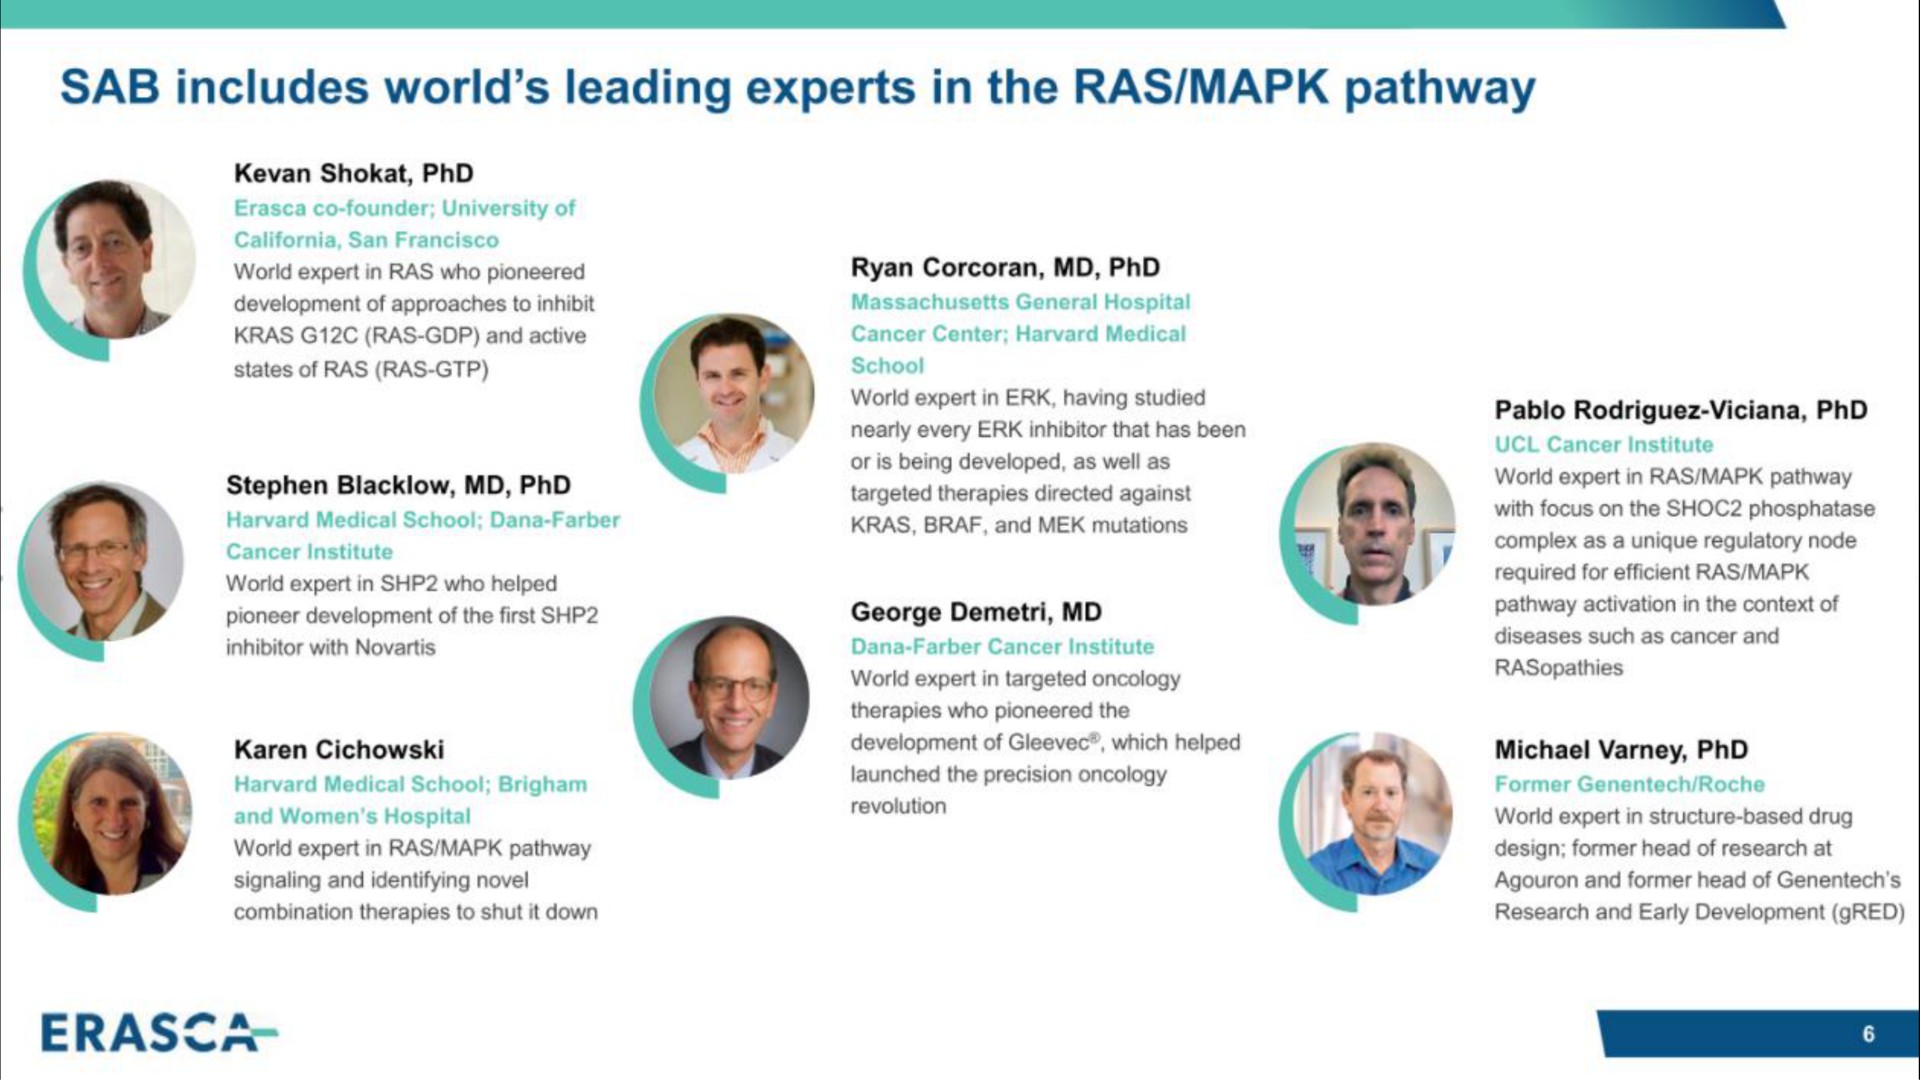 sab includes world leading experts in the ras pathway | Erasca